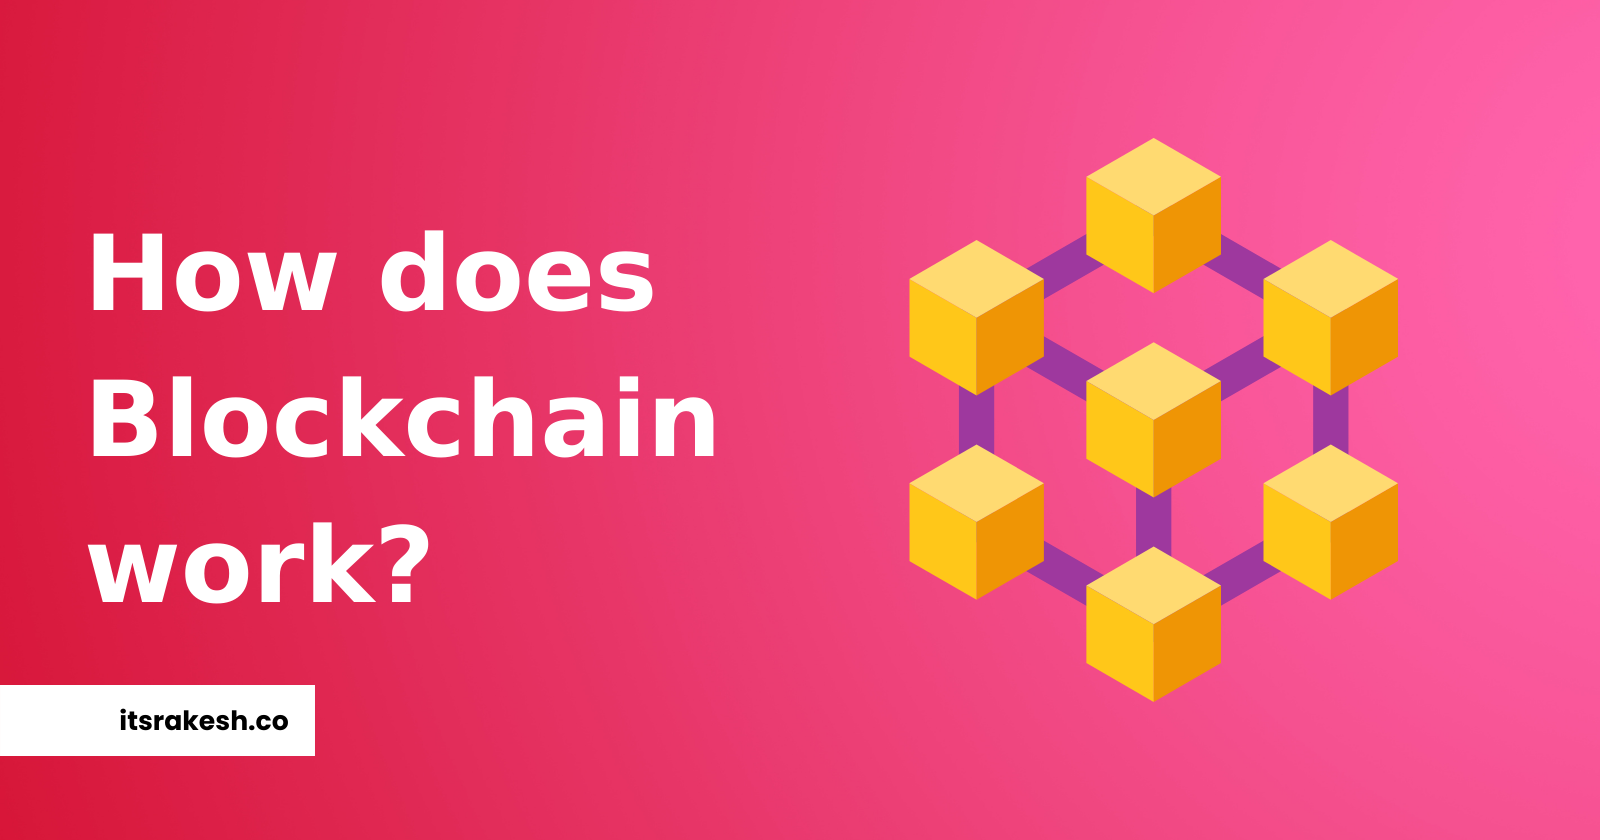 What is Blockchain? How does it work? Why do we need it?